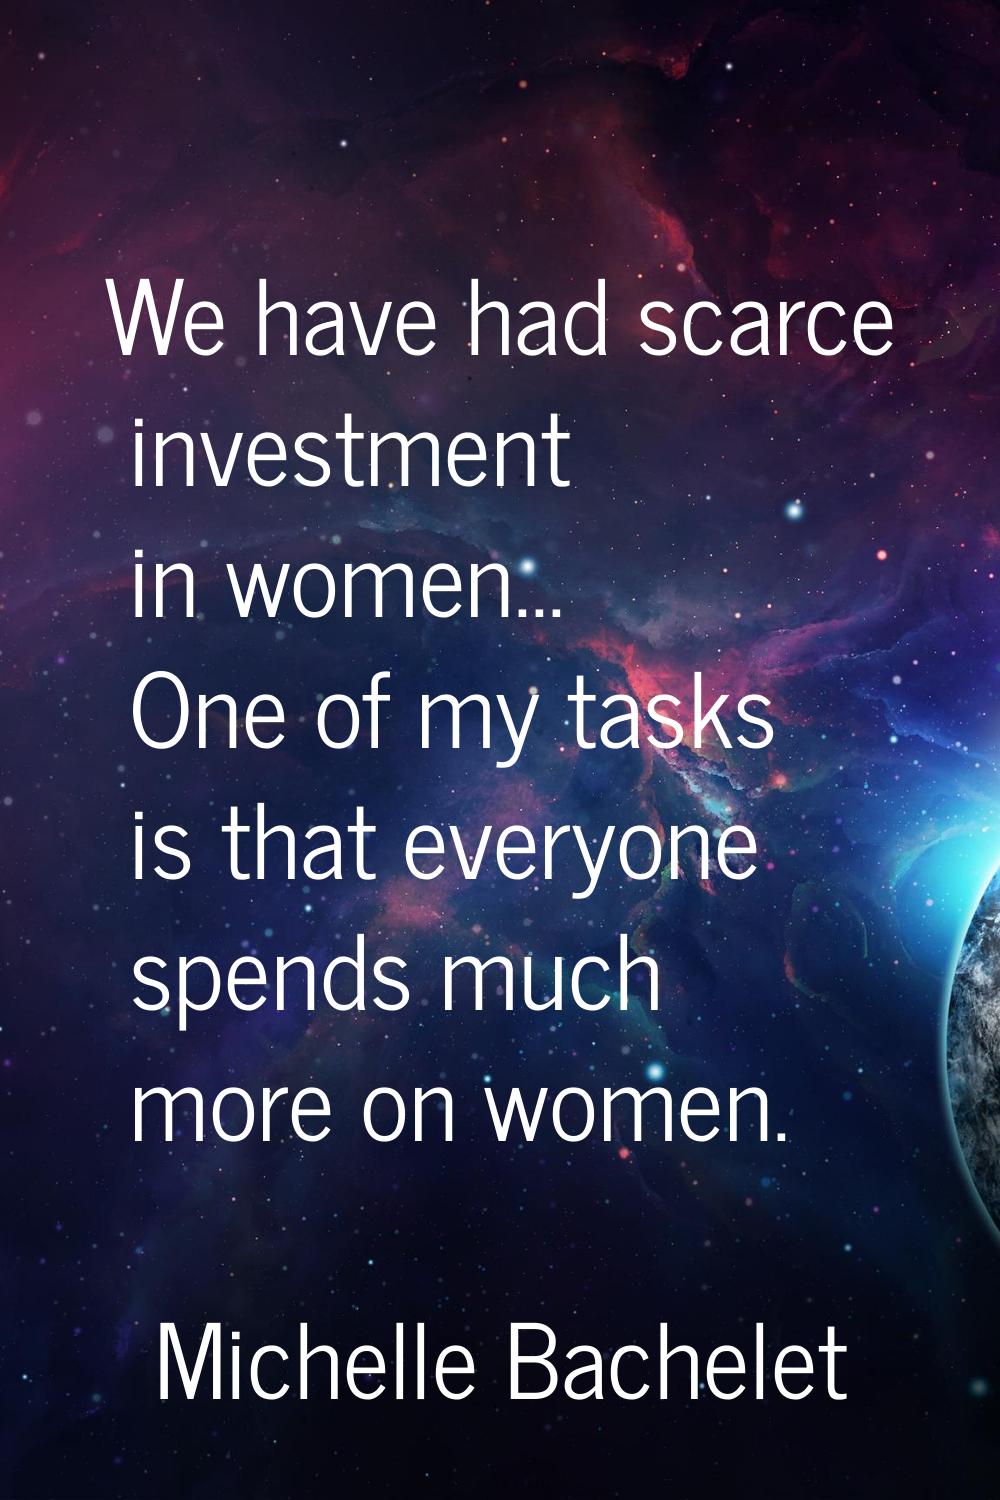 We have had scarce investment in women... One of my tasks is that everyone spends much more on wome